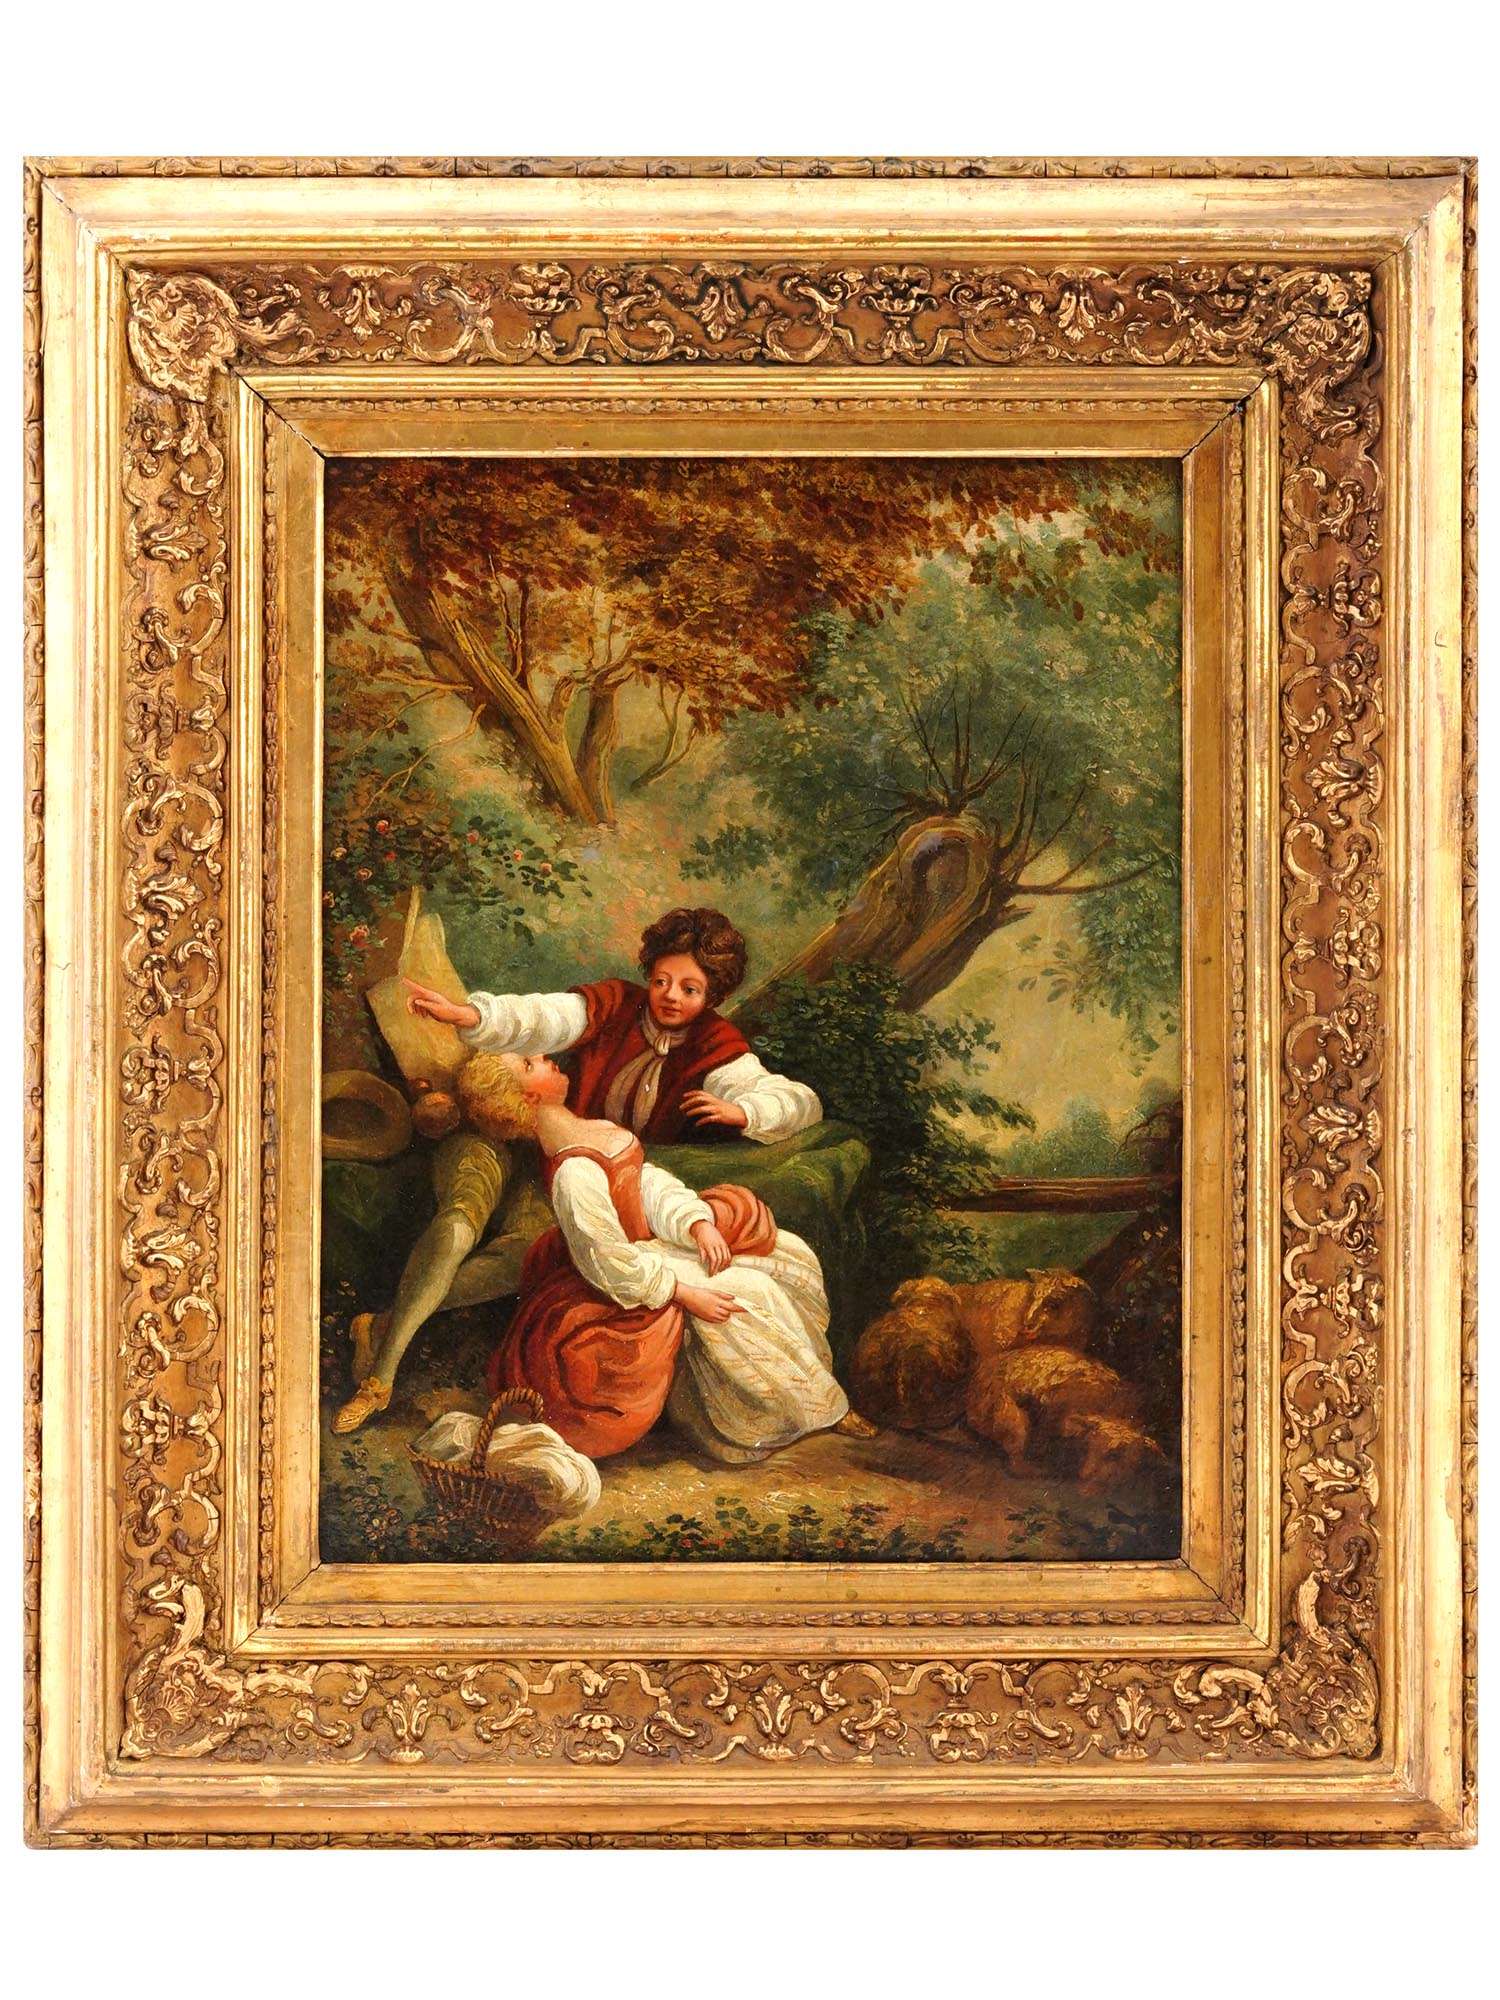 ANTIQUE 18TH C FRENCH GALANT SCENE OIL PAINTING PIC-0